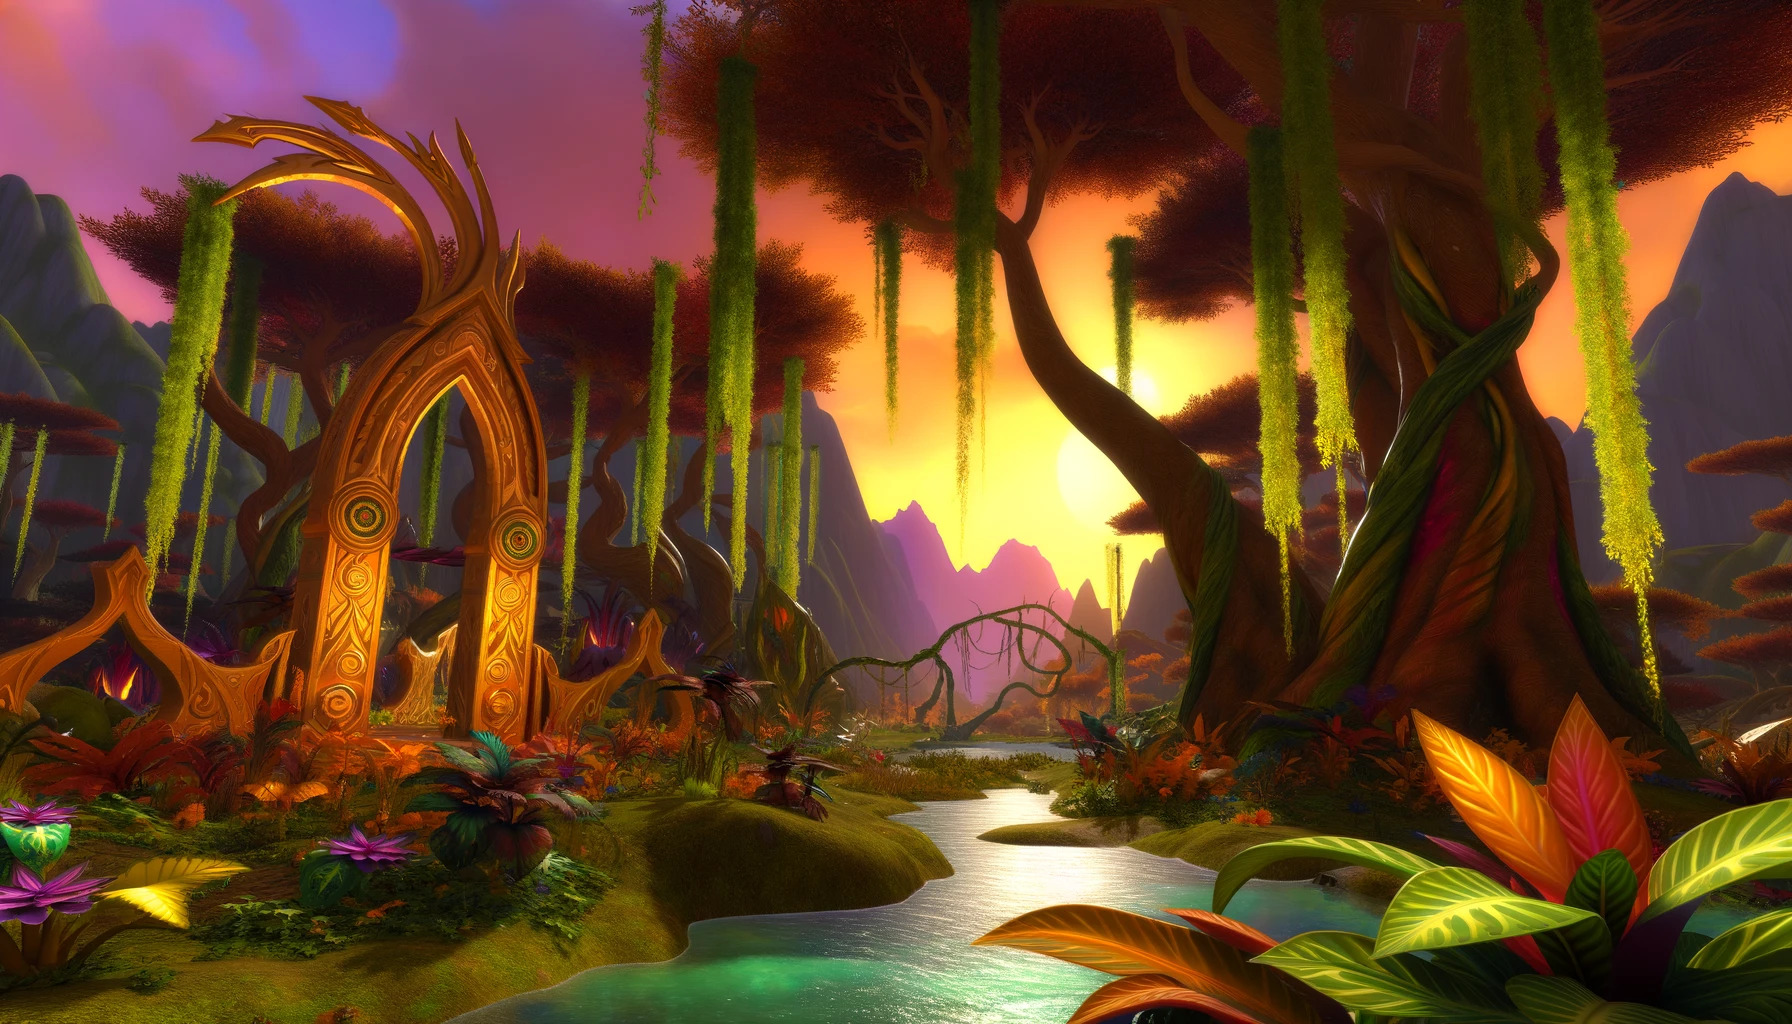 a cinematic image inspired by a Blood Elf theme, set in a fantastical landscape. Feel free to explore the details in the image.